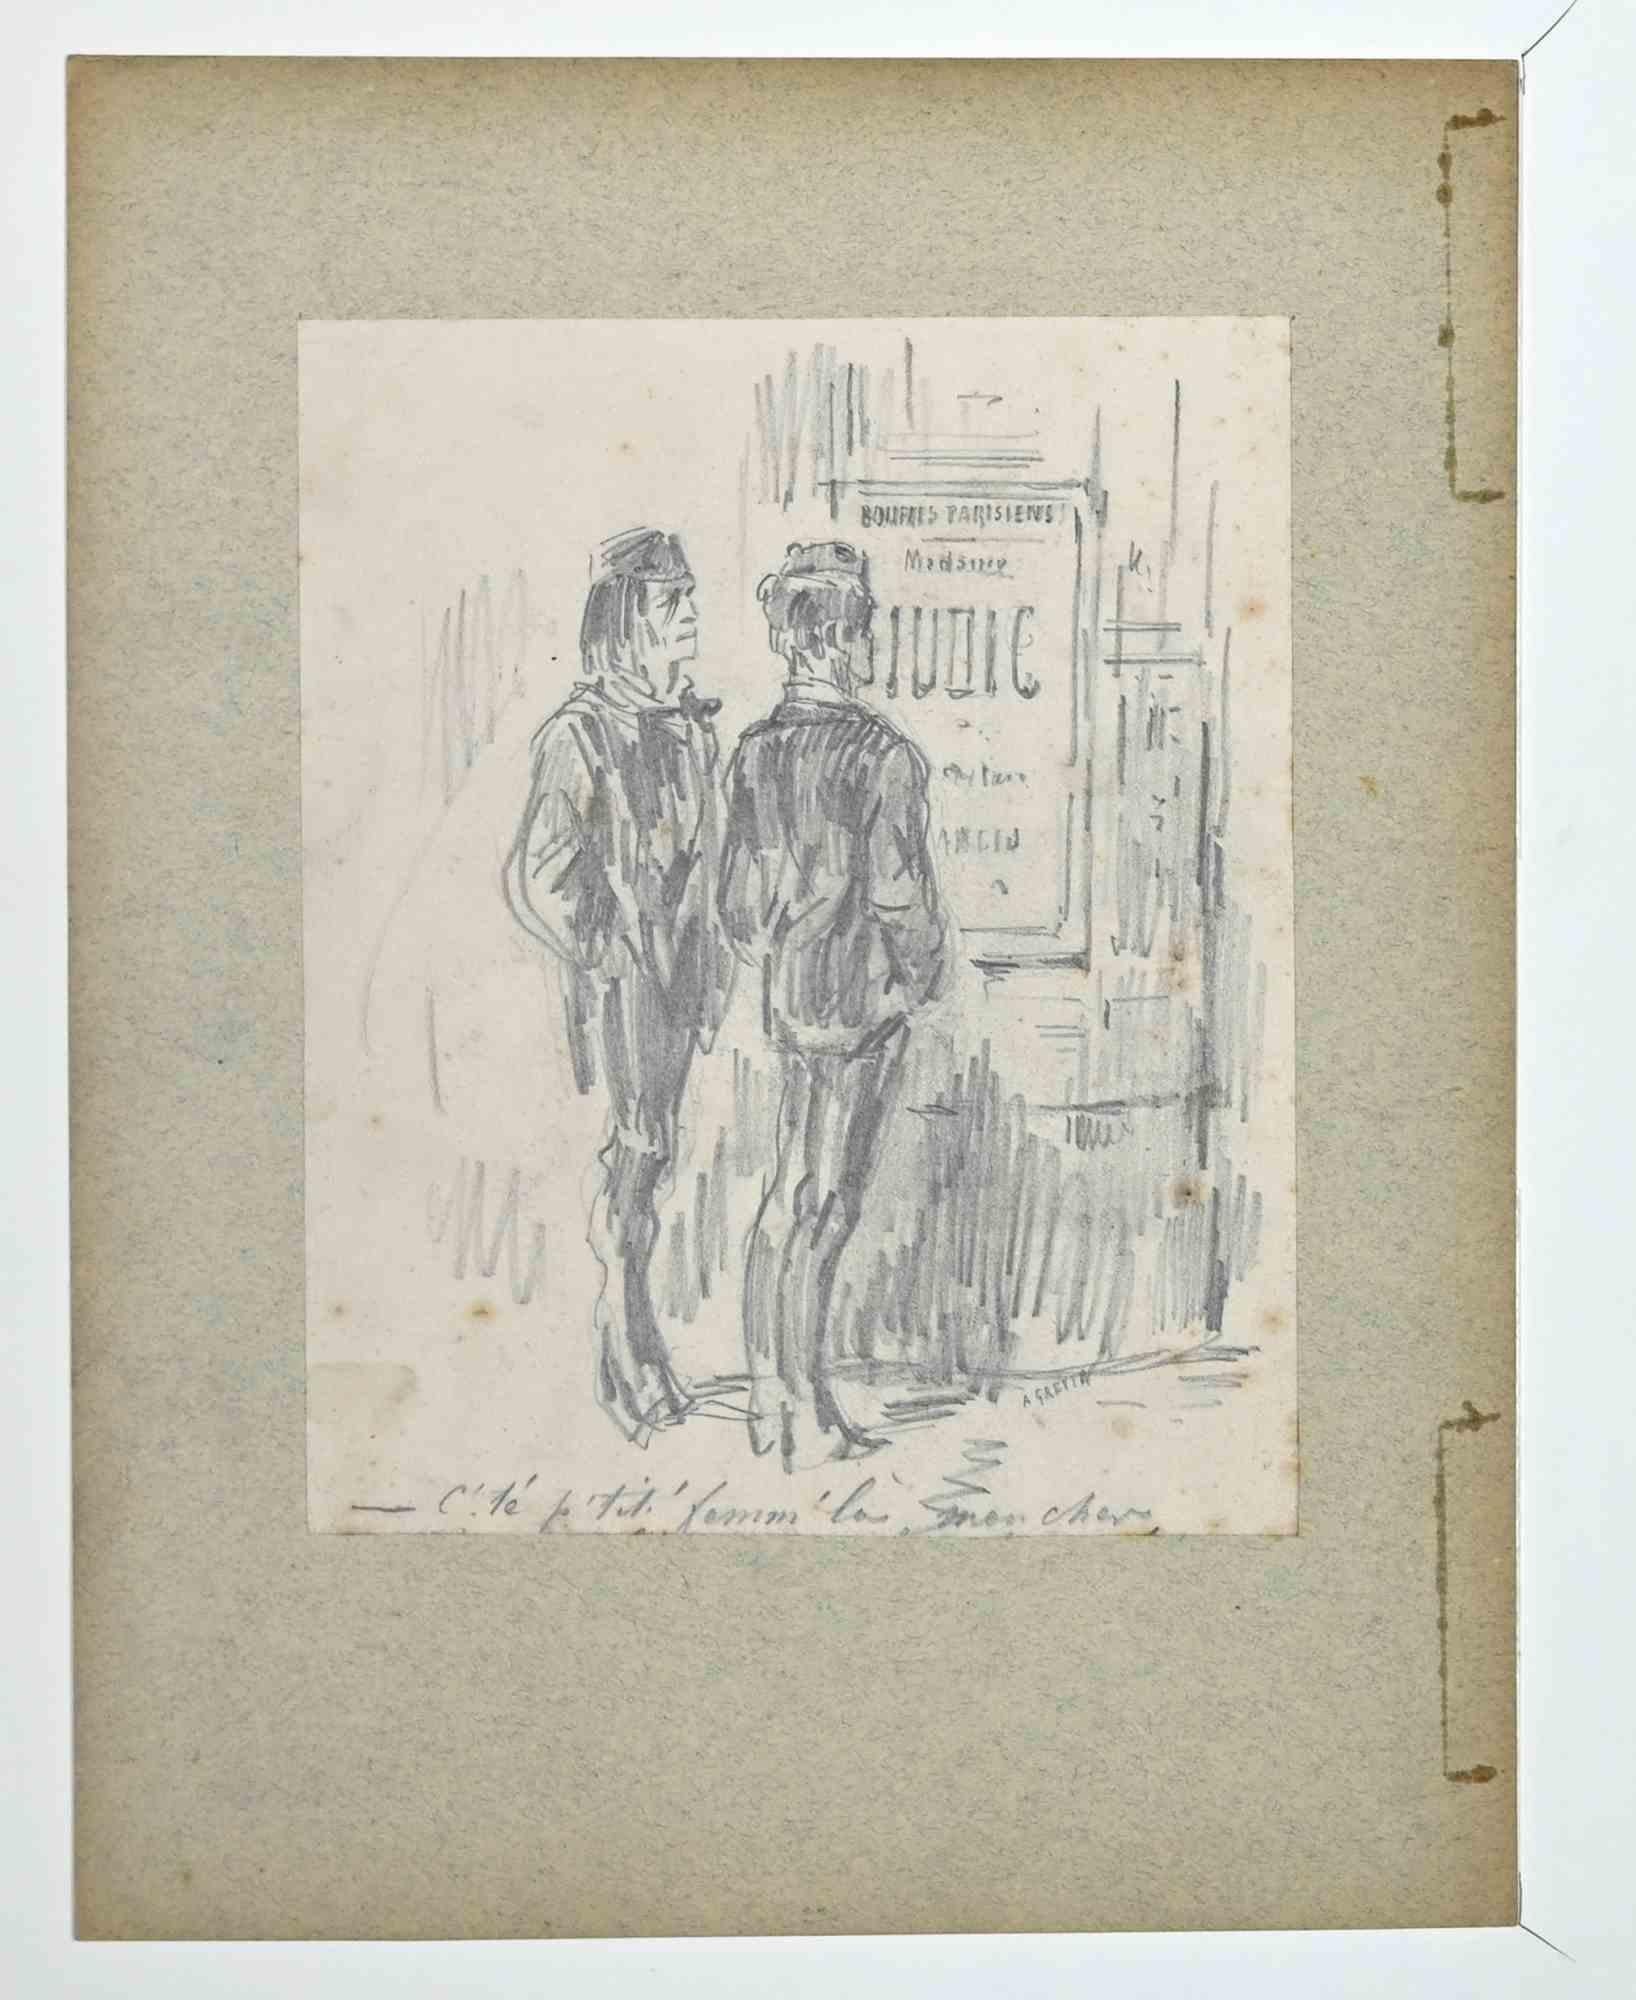 Men In The Outdoor is an original drawing in Pencil realized by Alfred Grévin in the Late-19 Century.

Applied on a Passepartout: 50 x 33 cm.

In good conditions.

Alfred Grévin  (1827- 1892), was a 19th-century caricaturist, best known during his